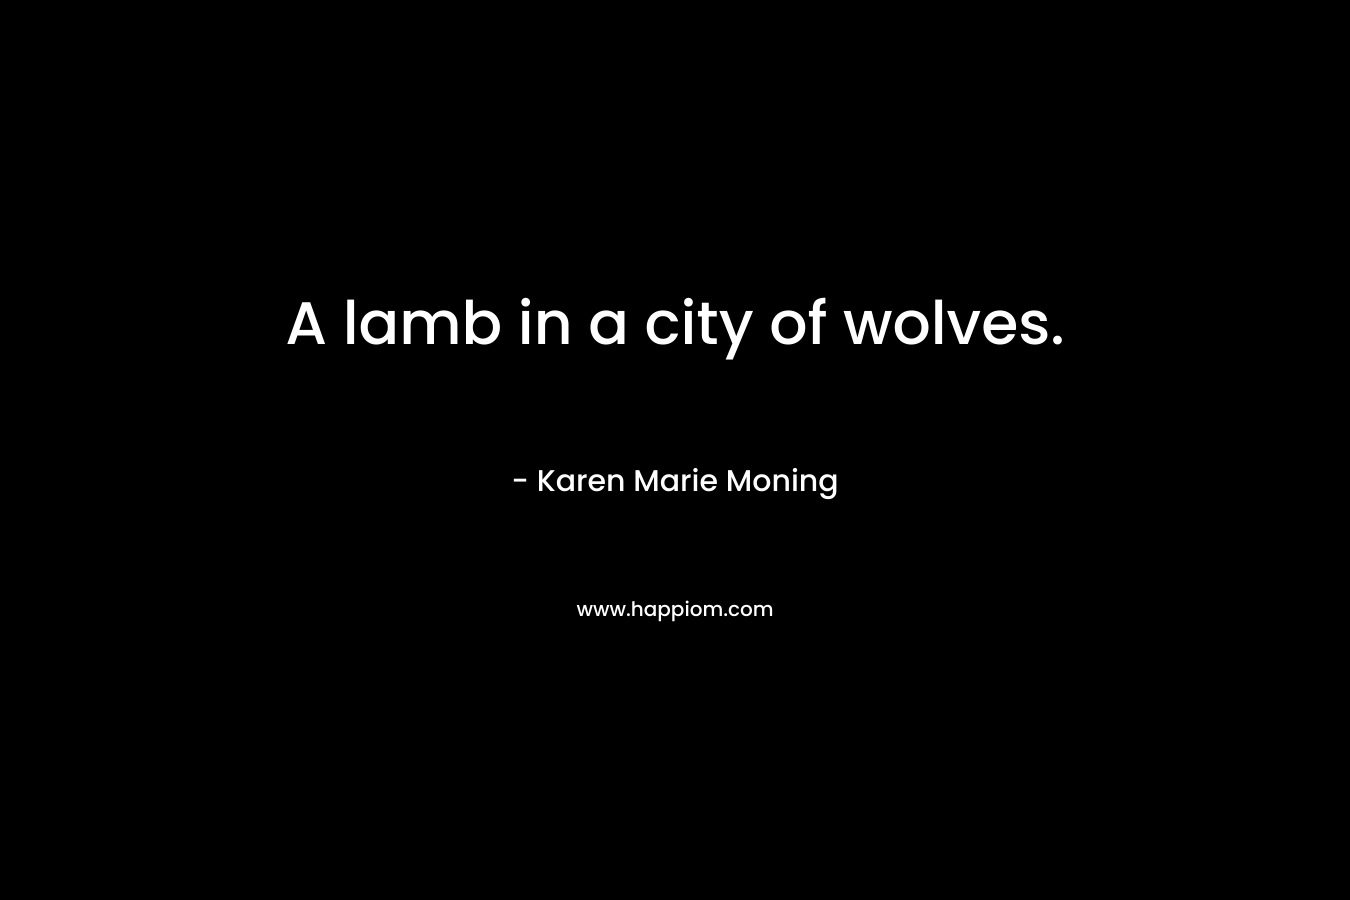 A lamb in a city of wolves.